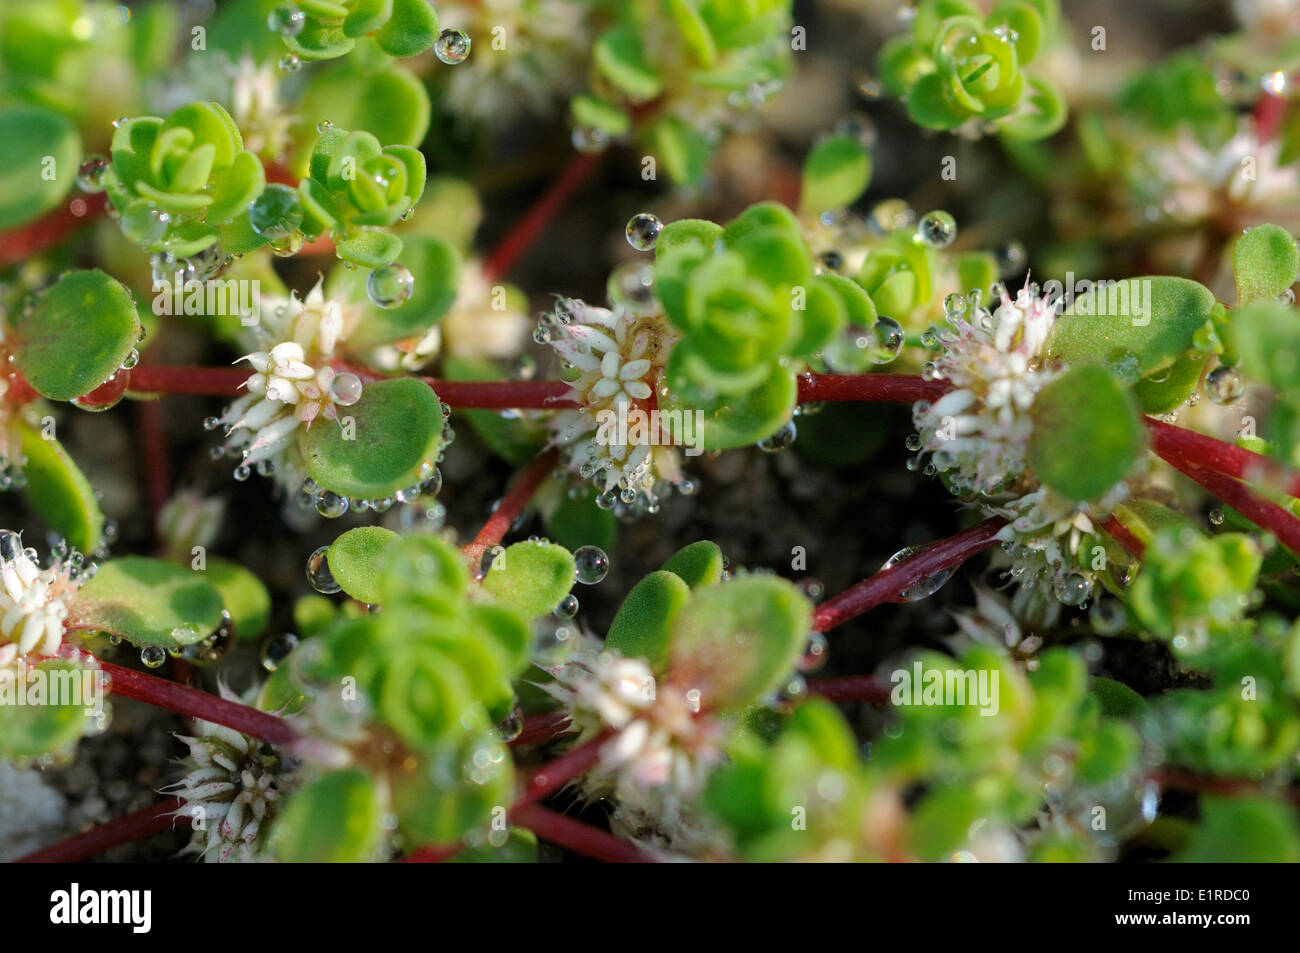 Coral-necklace is a small annual plant found on the dirtroads which are wet in winter and dry in summer. Due to the demand for Stock Photo